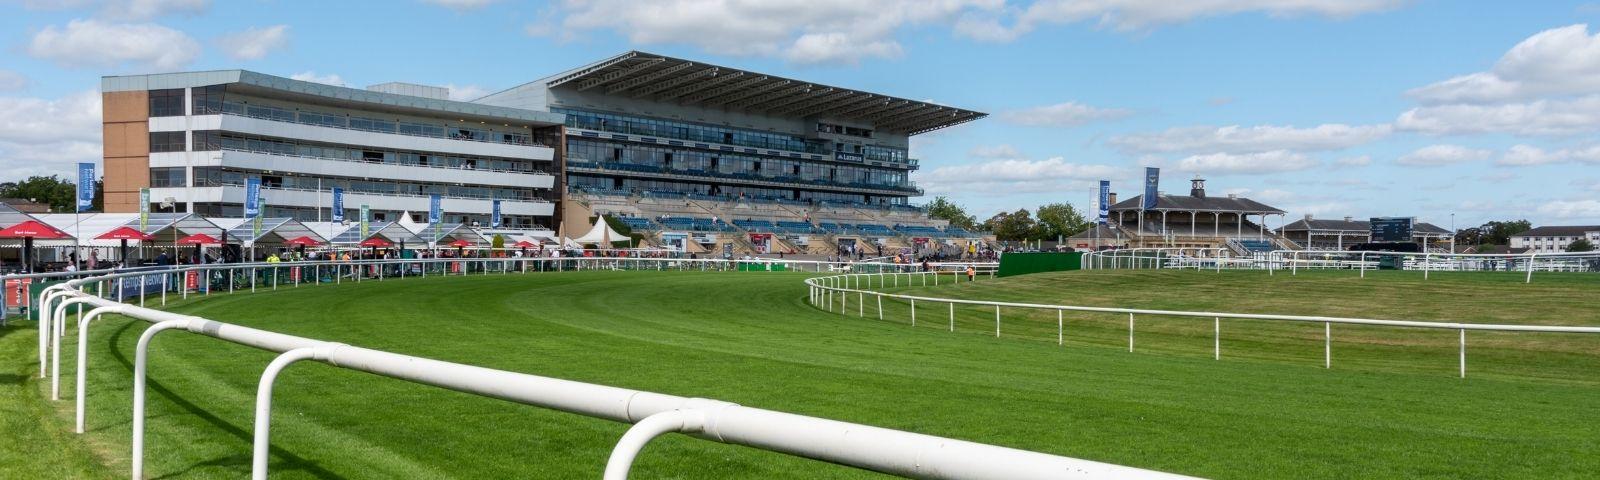 Visitor Experience | Doncaster Racecourse